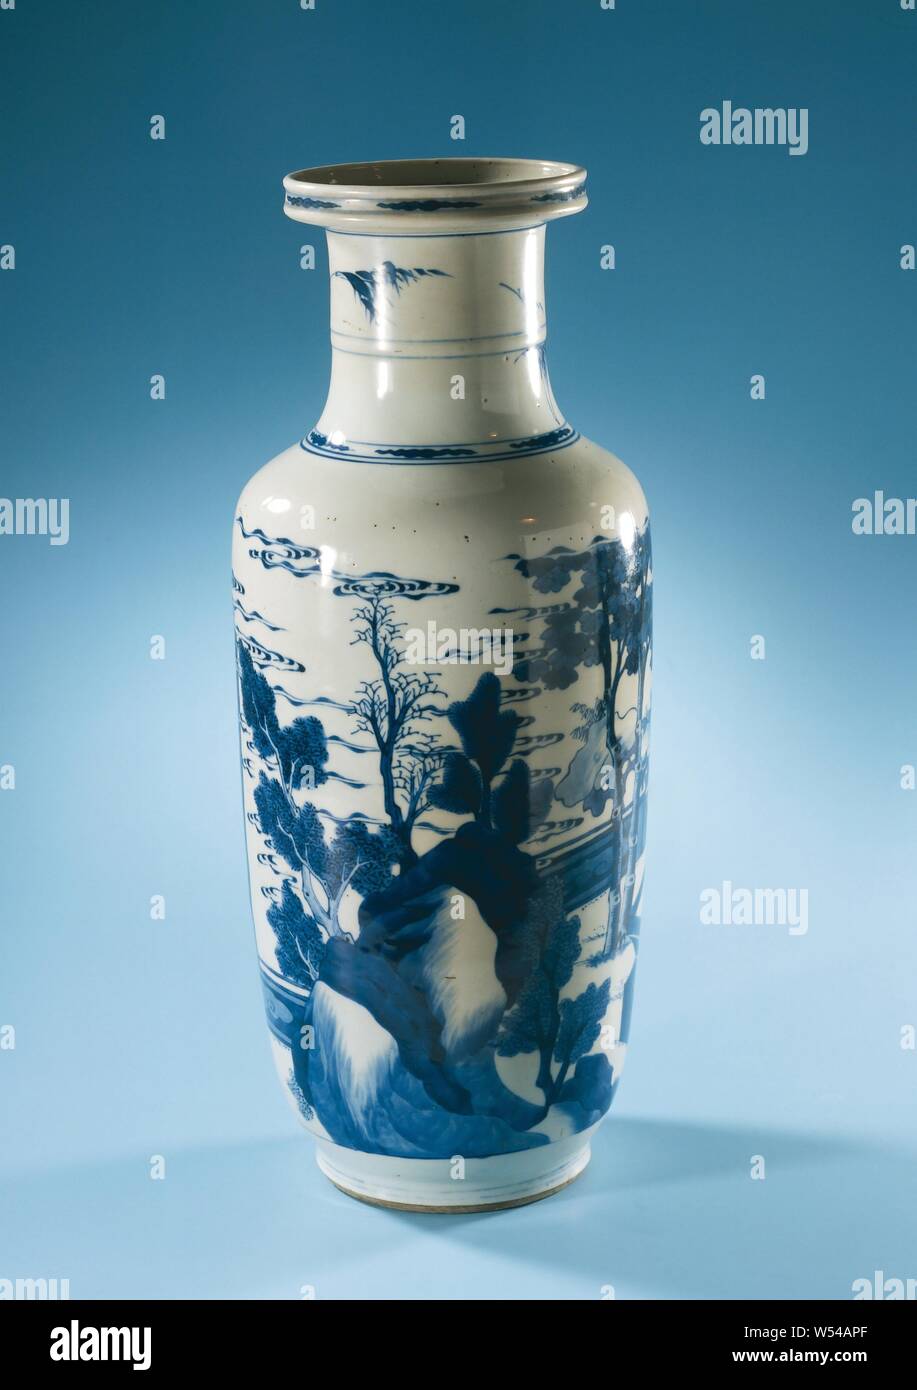 Vase with a fenced garden with Chinese figures in a pavilion, Porcelain vase  with a cylindrical body that extends slightly towards the shoulders, a wide  cylindrical neck with a sharp, raised edge